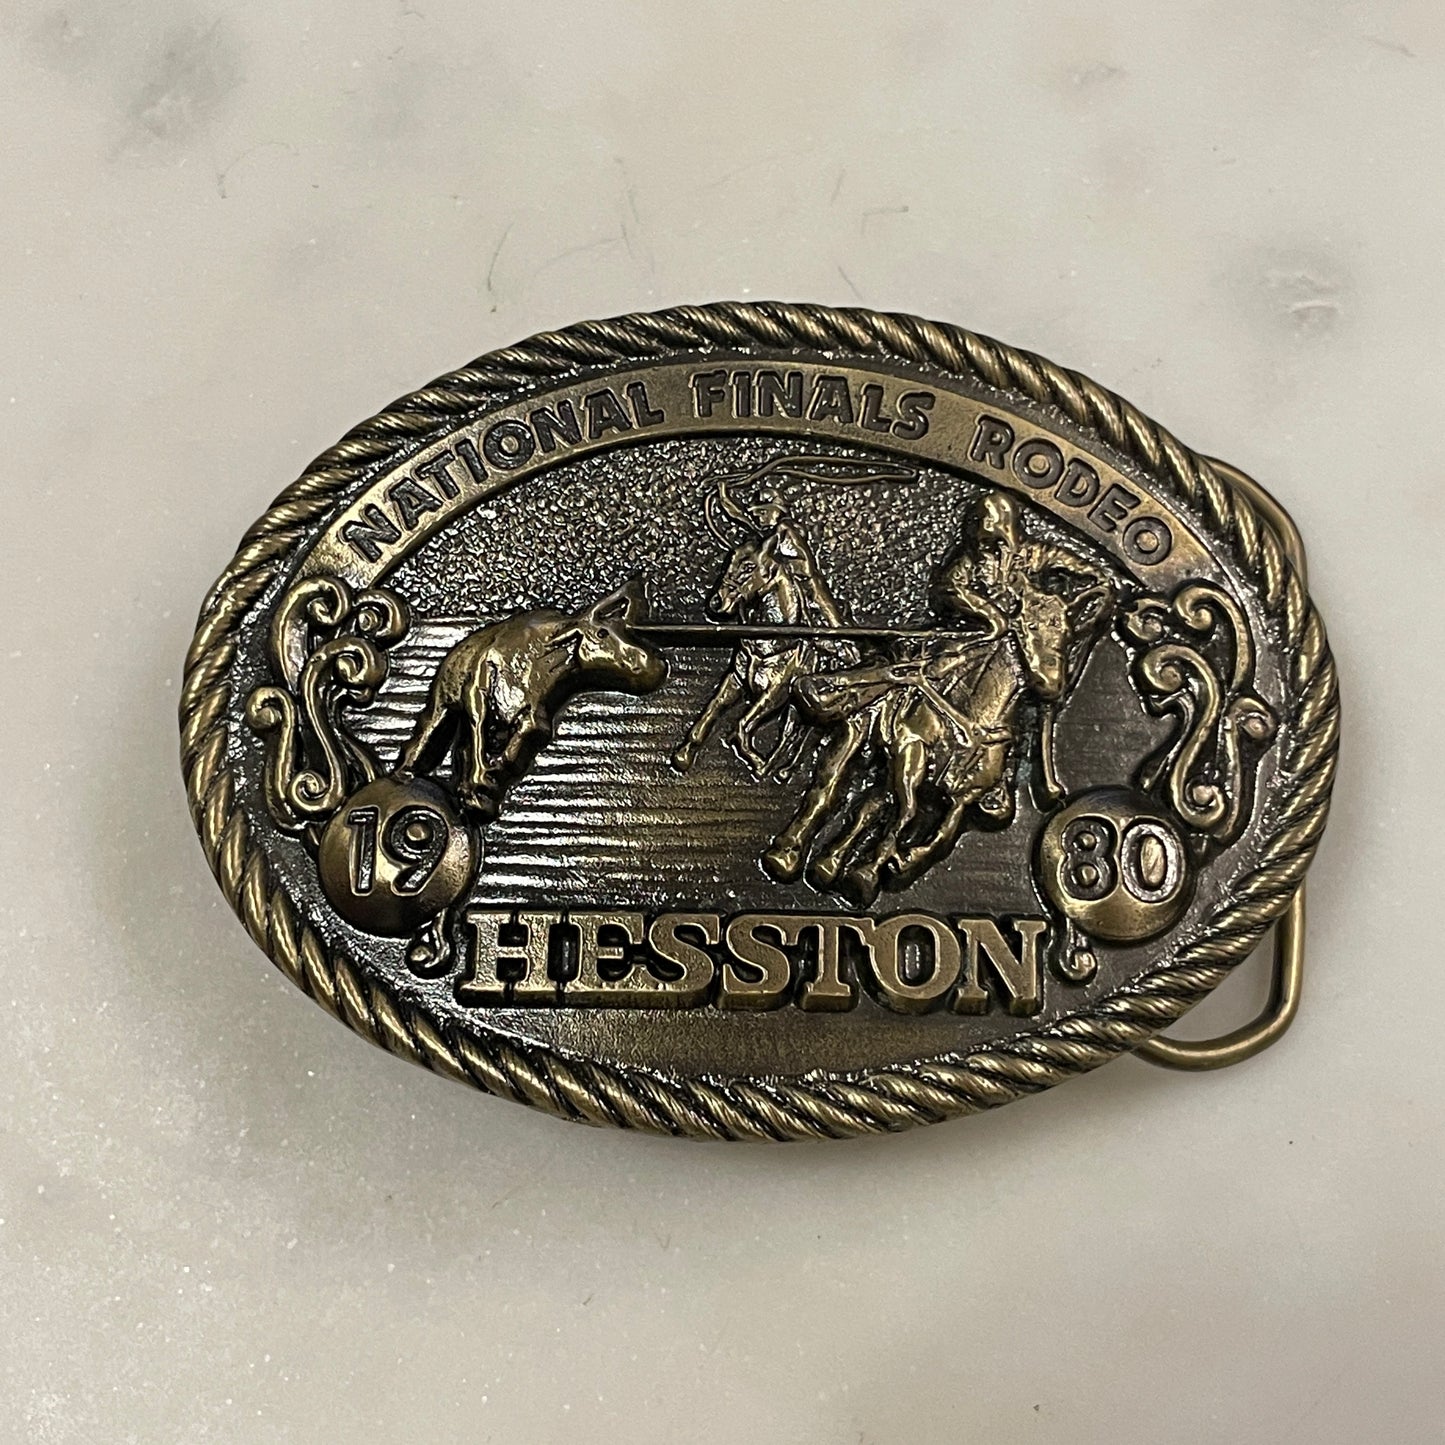 National Finals Rodeo Buckle [1980]